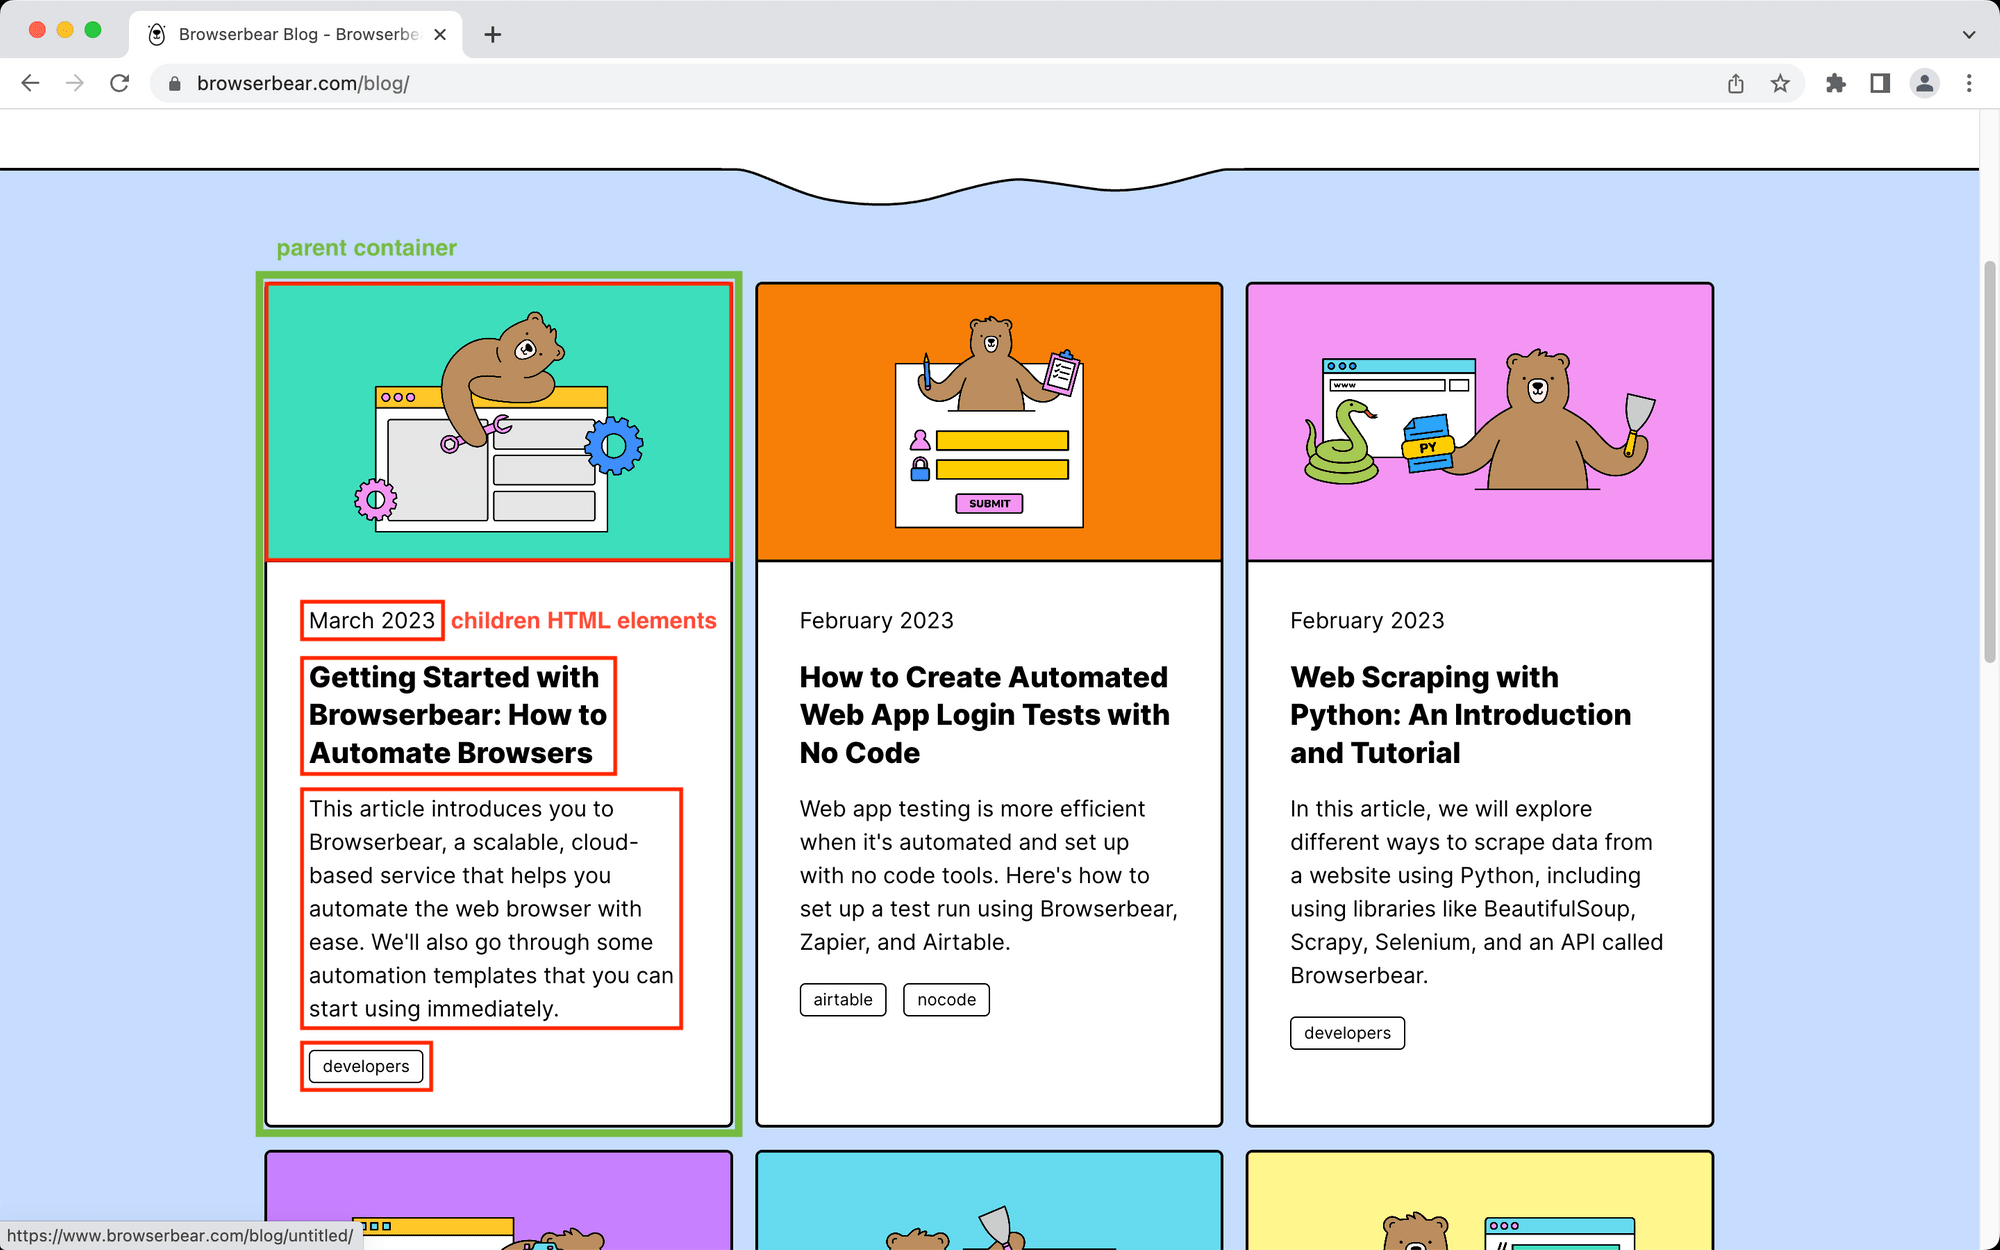 Screenshot of Browserbear blog page with parent container and children HTML elements outlined